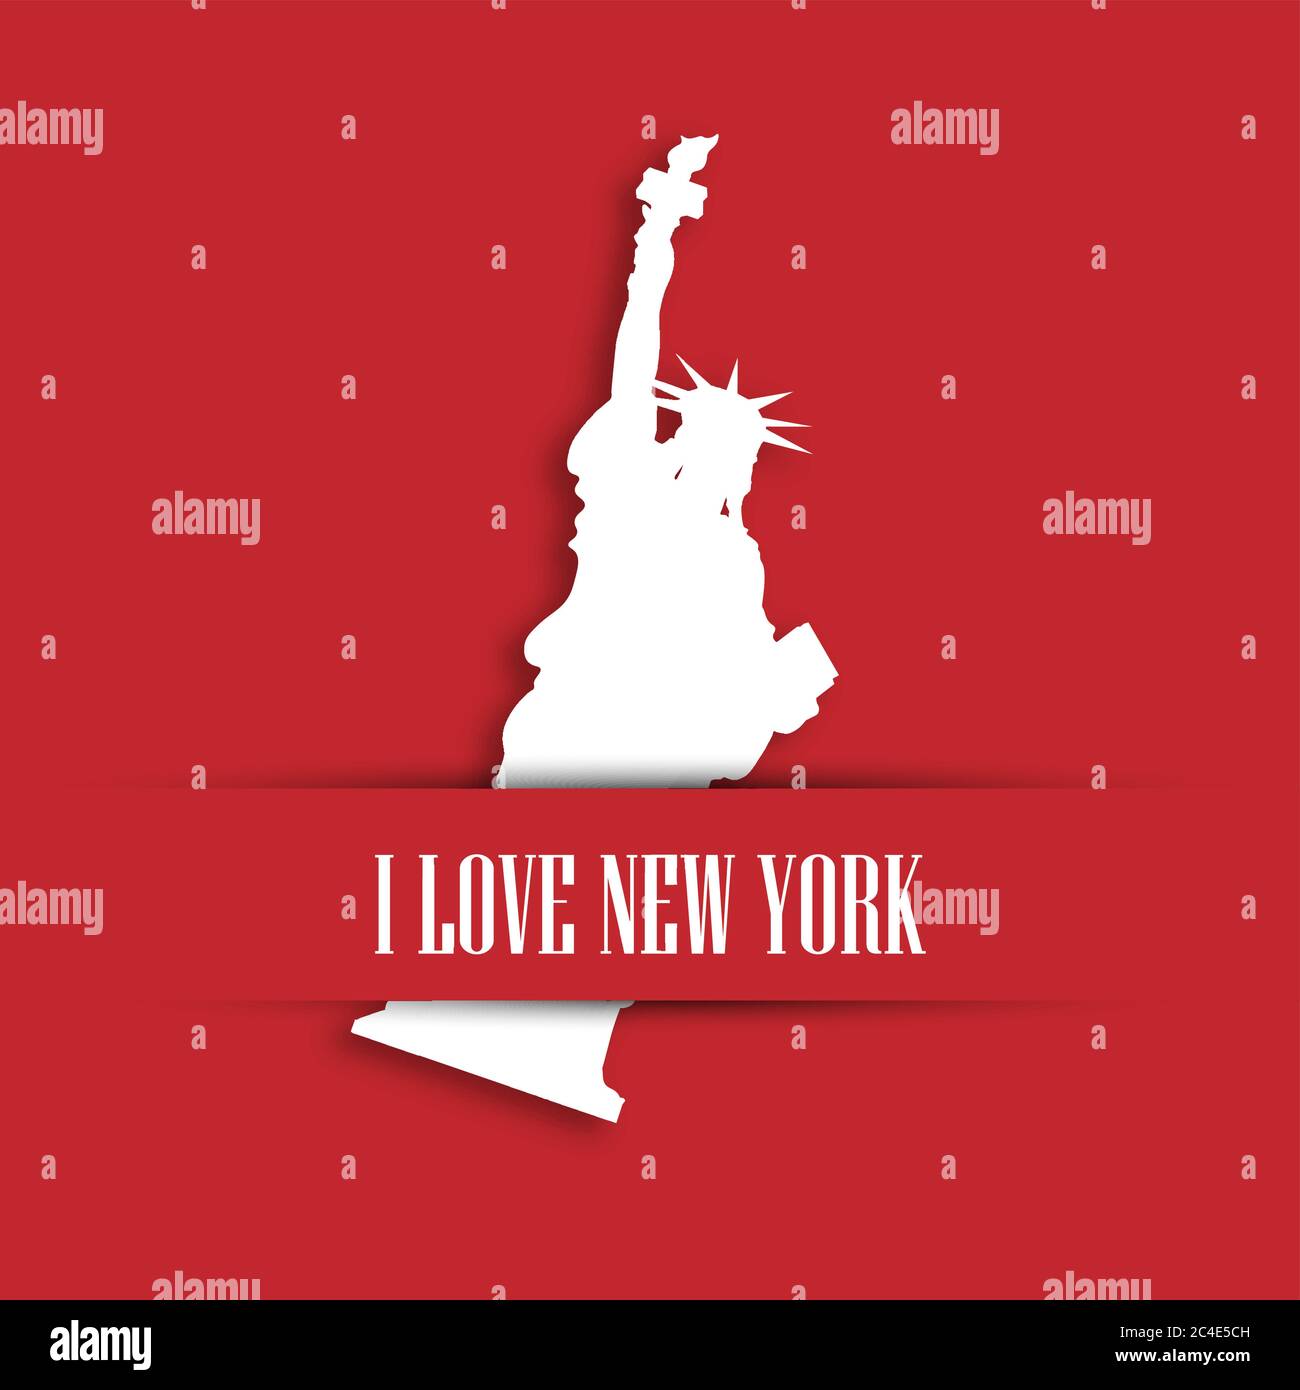 Statue of Liberty white paper cutting in red greeting card pocket with label I love New York. United States symbol and Independence day theme. Vector illustration. Stock Vector